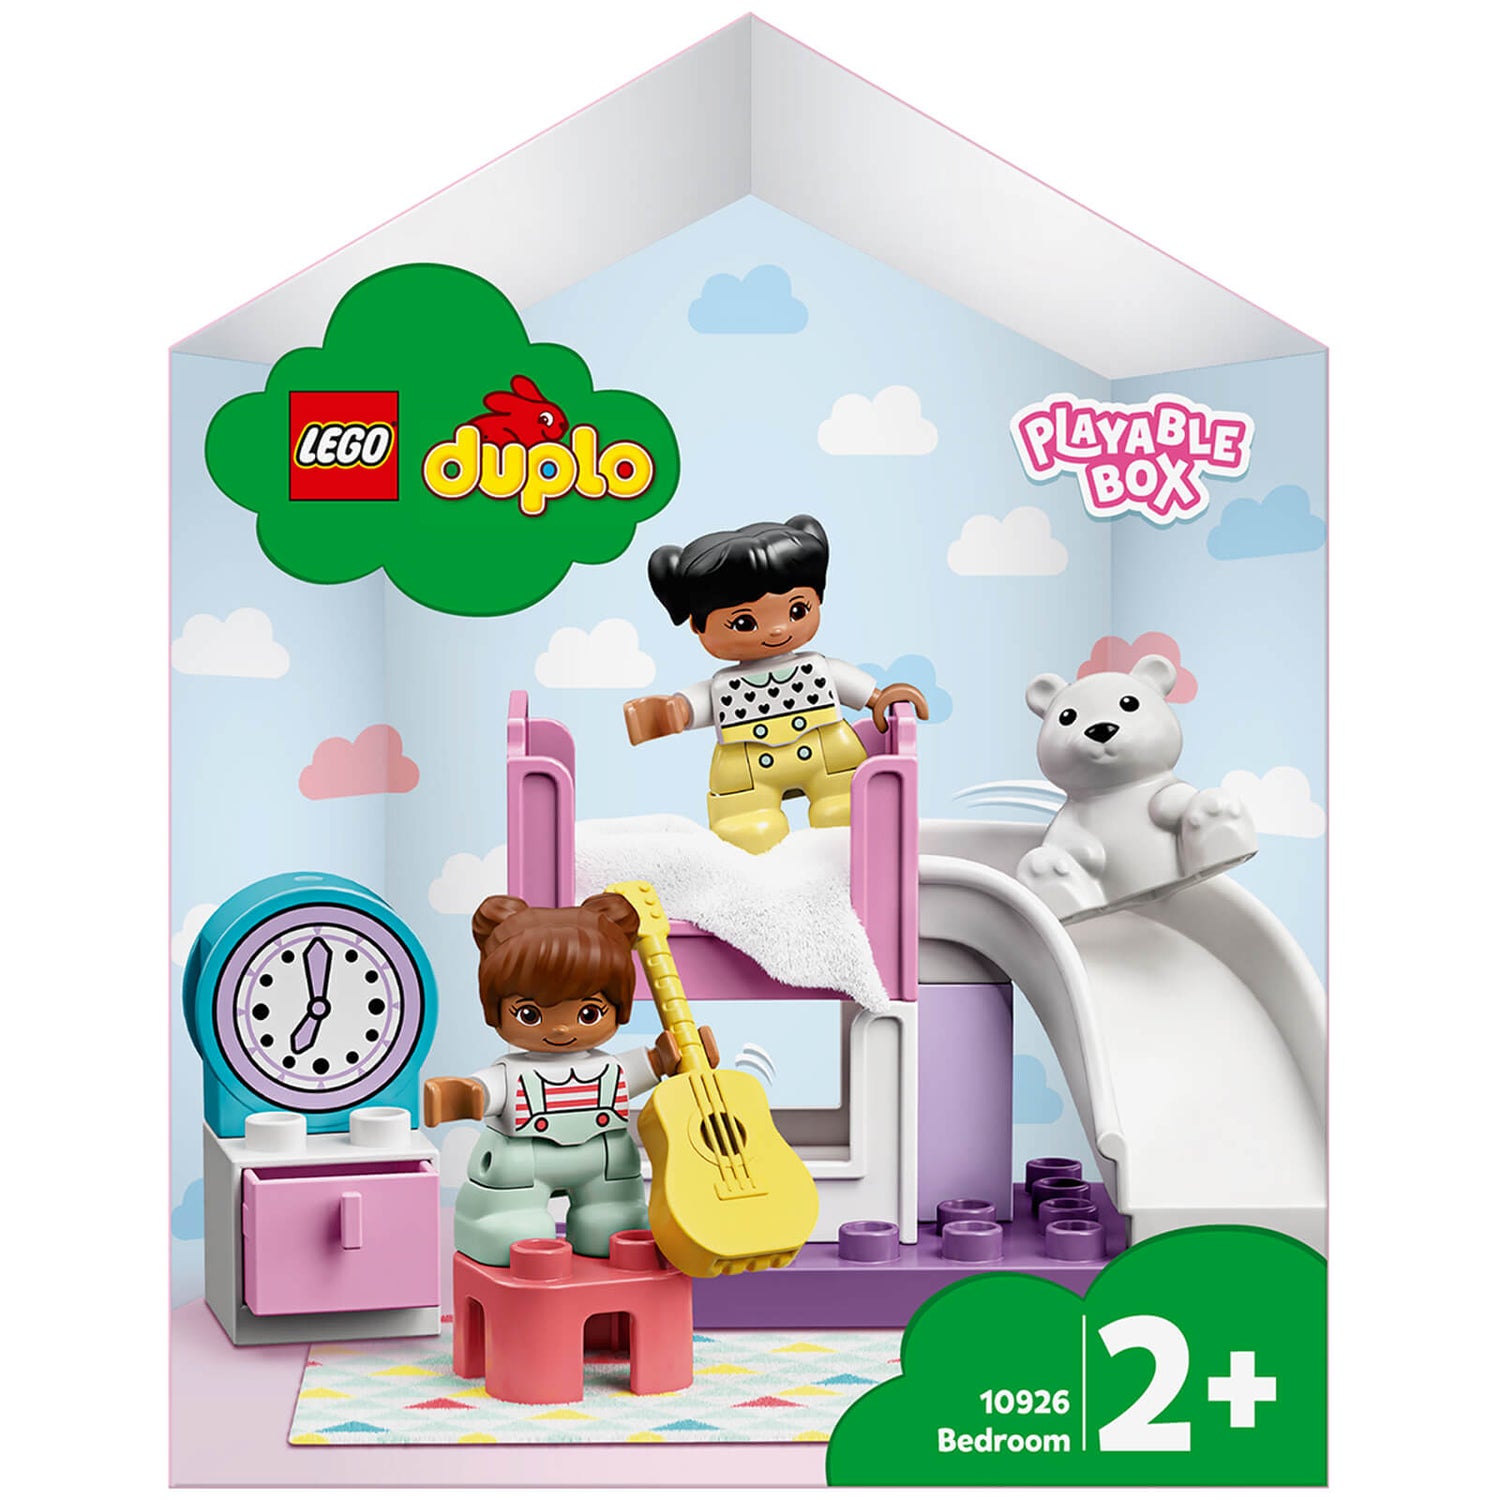 LEGO DUPLO Town: Bedroom Playable Dolls House Box (10926)